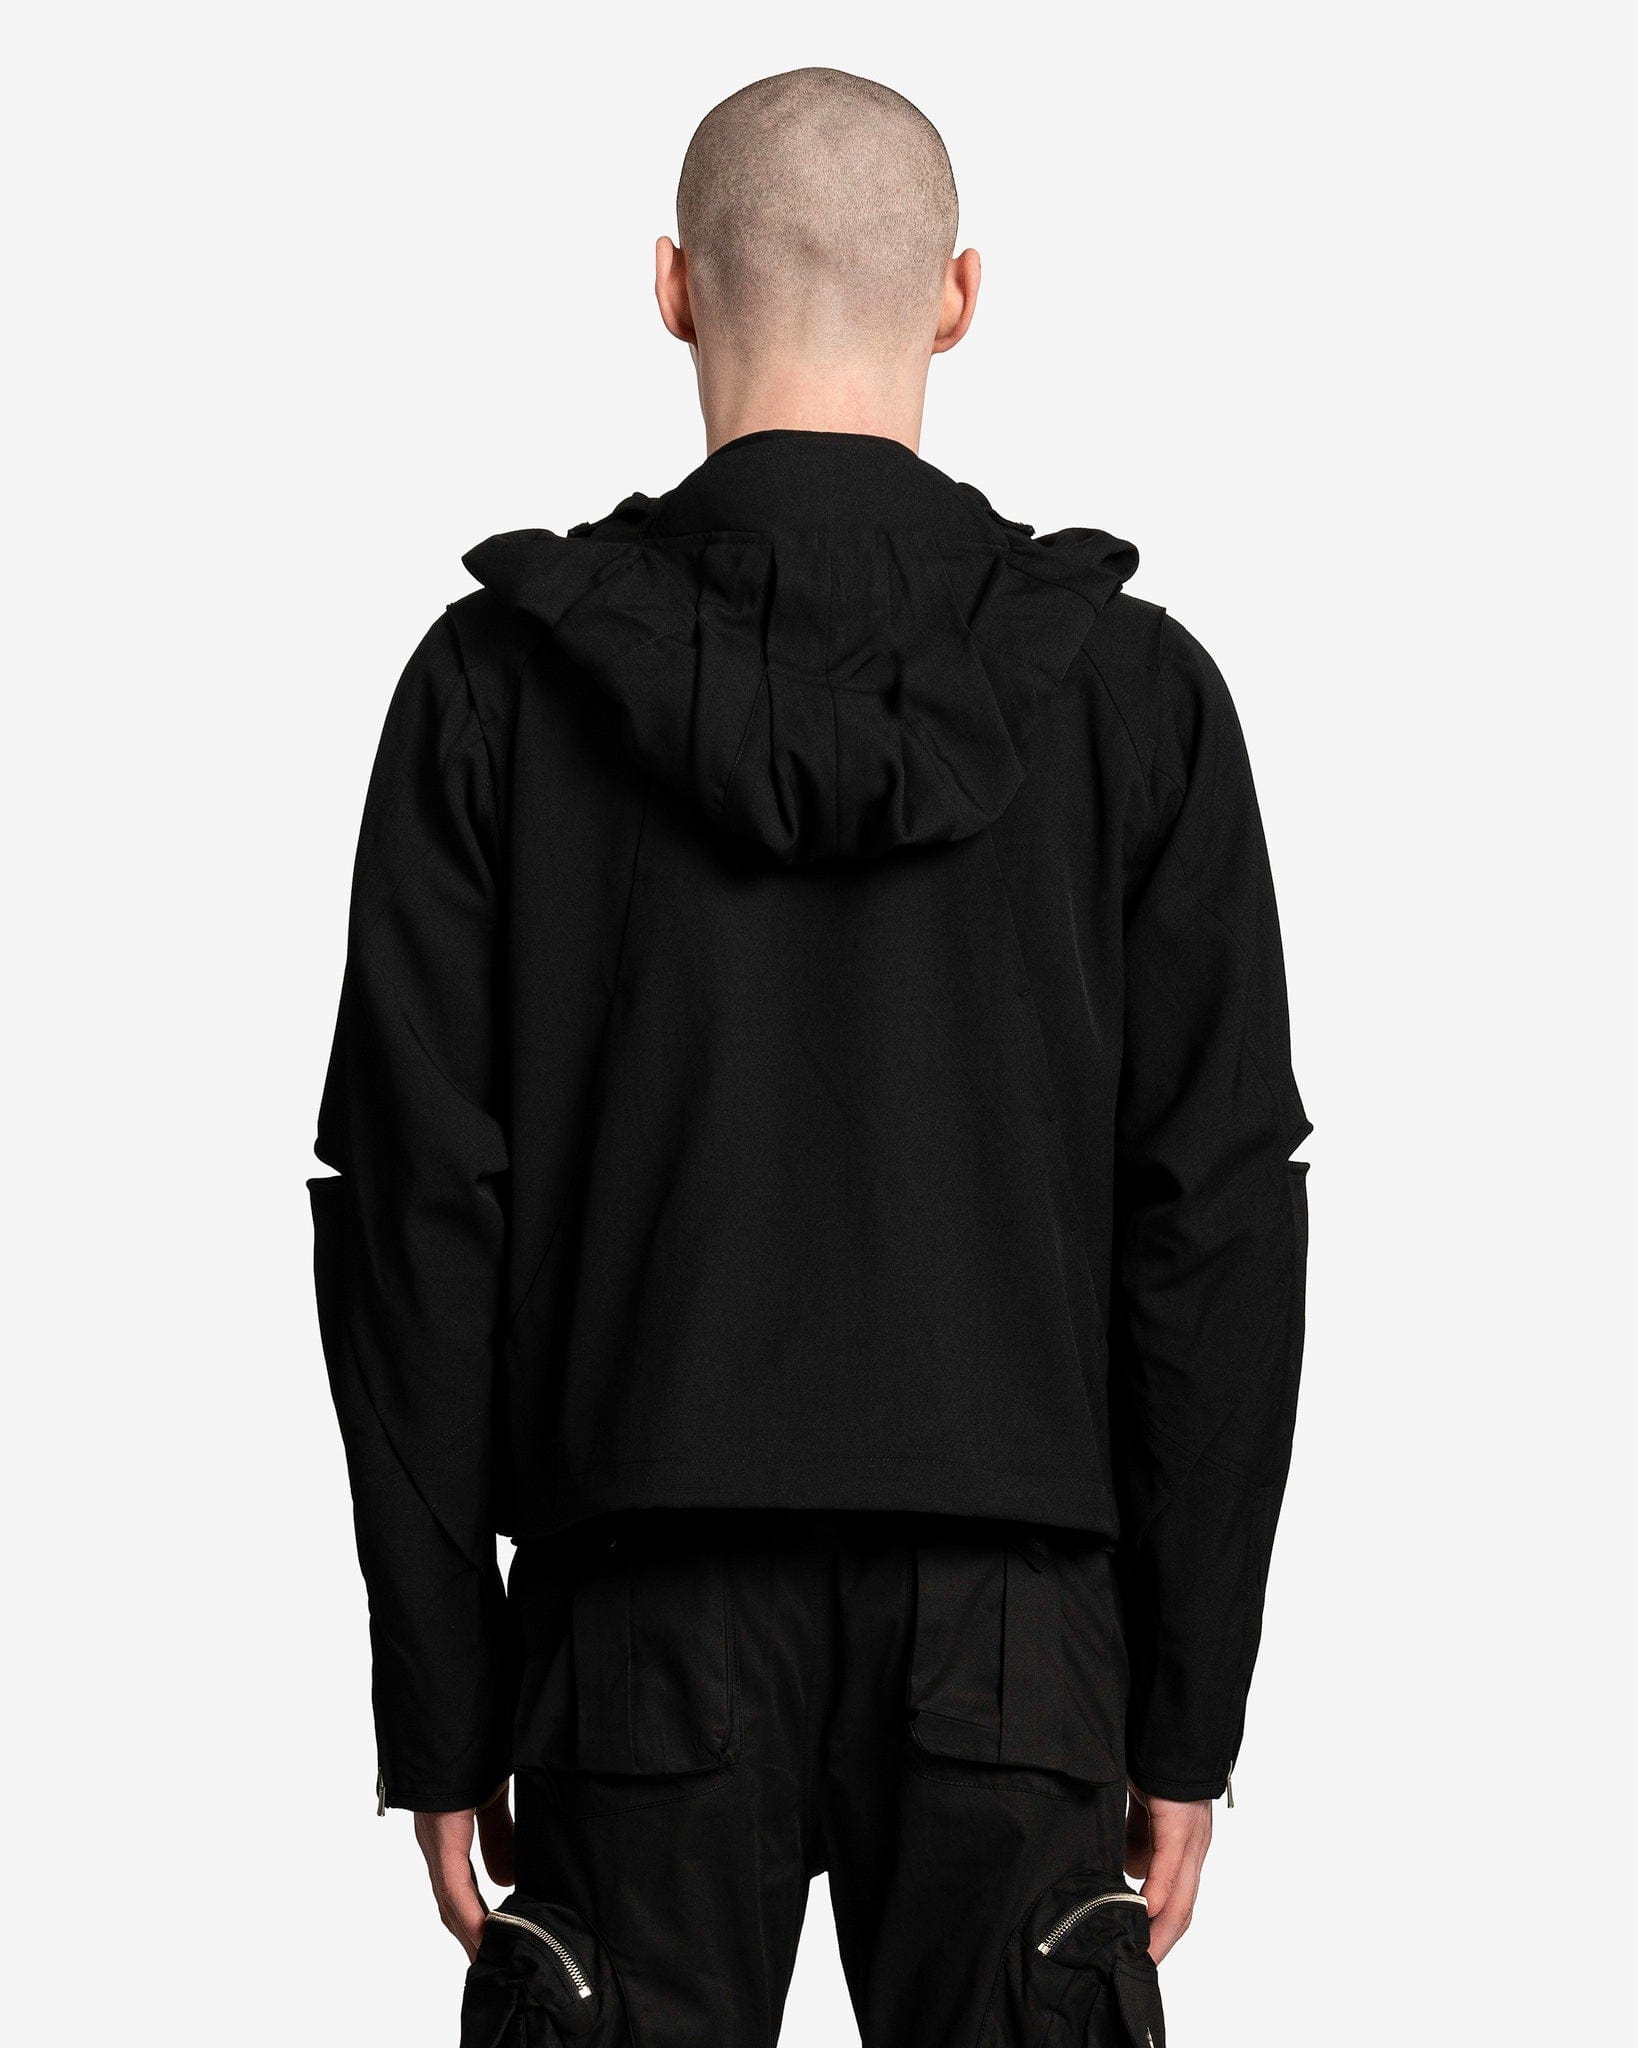 Hooded Parachute Bomber with Detachable Hood in Black